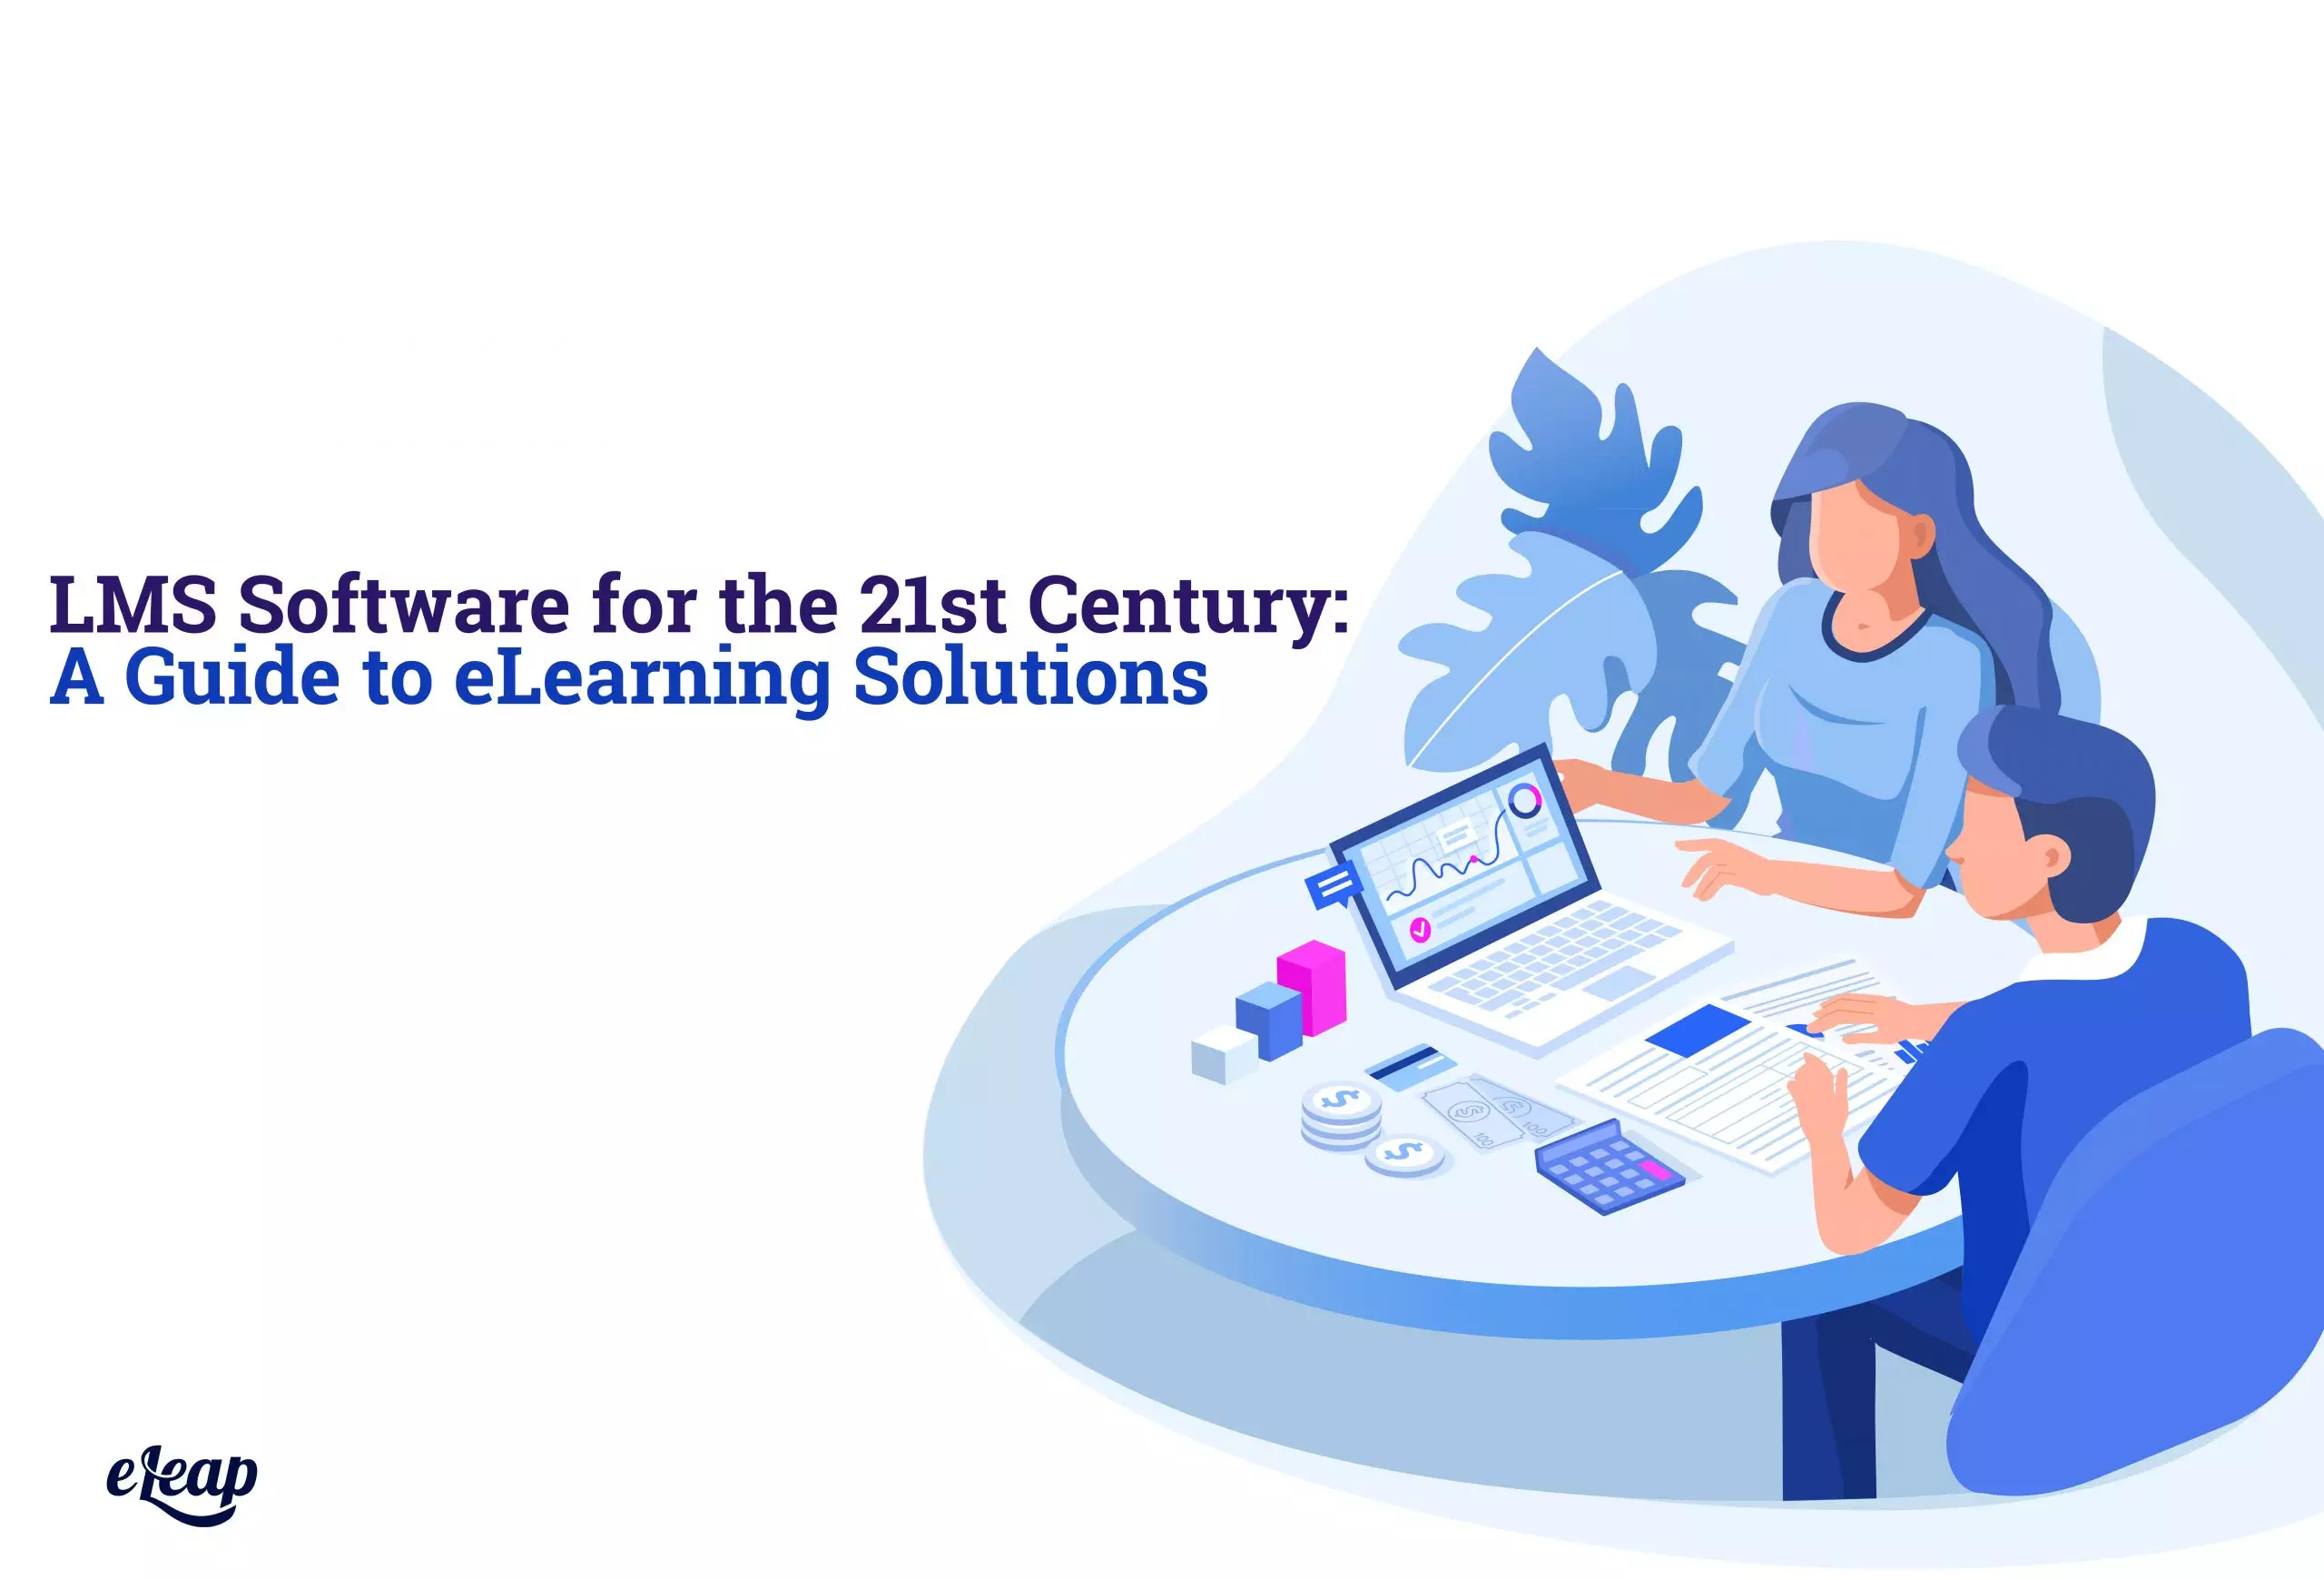 LMS Learning Management Systems to take care of the toughest challenges